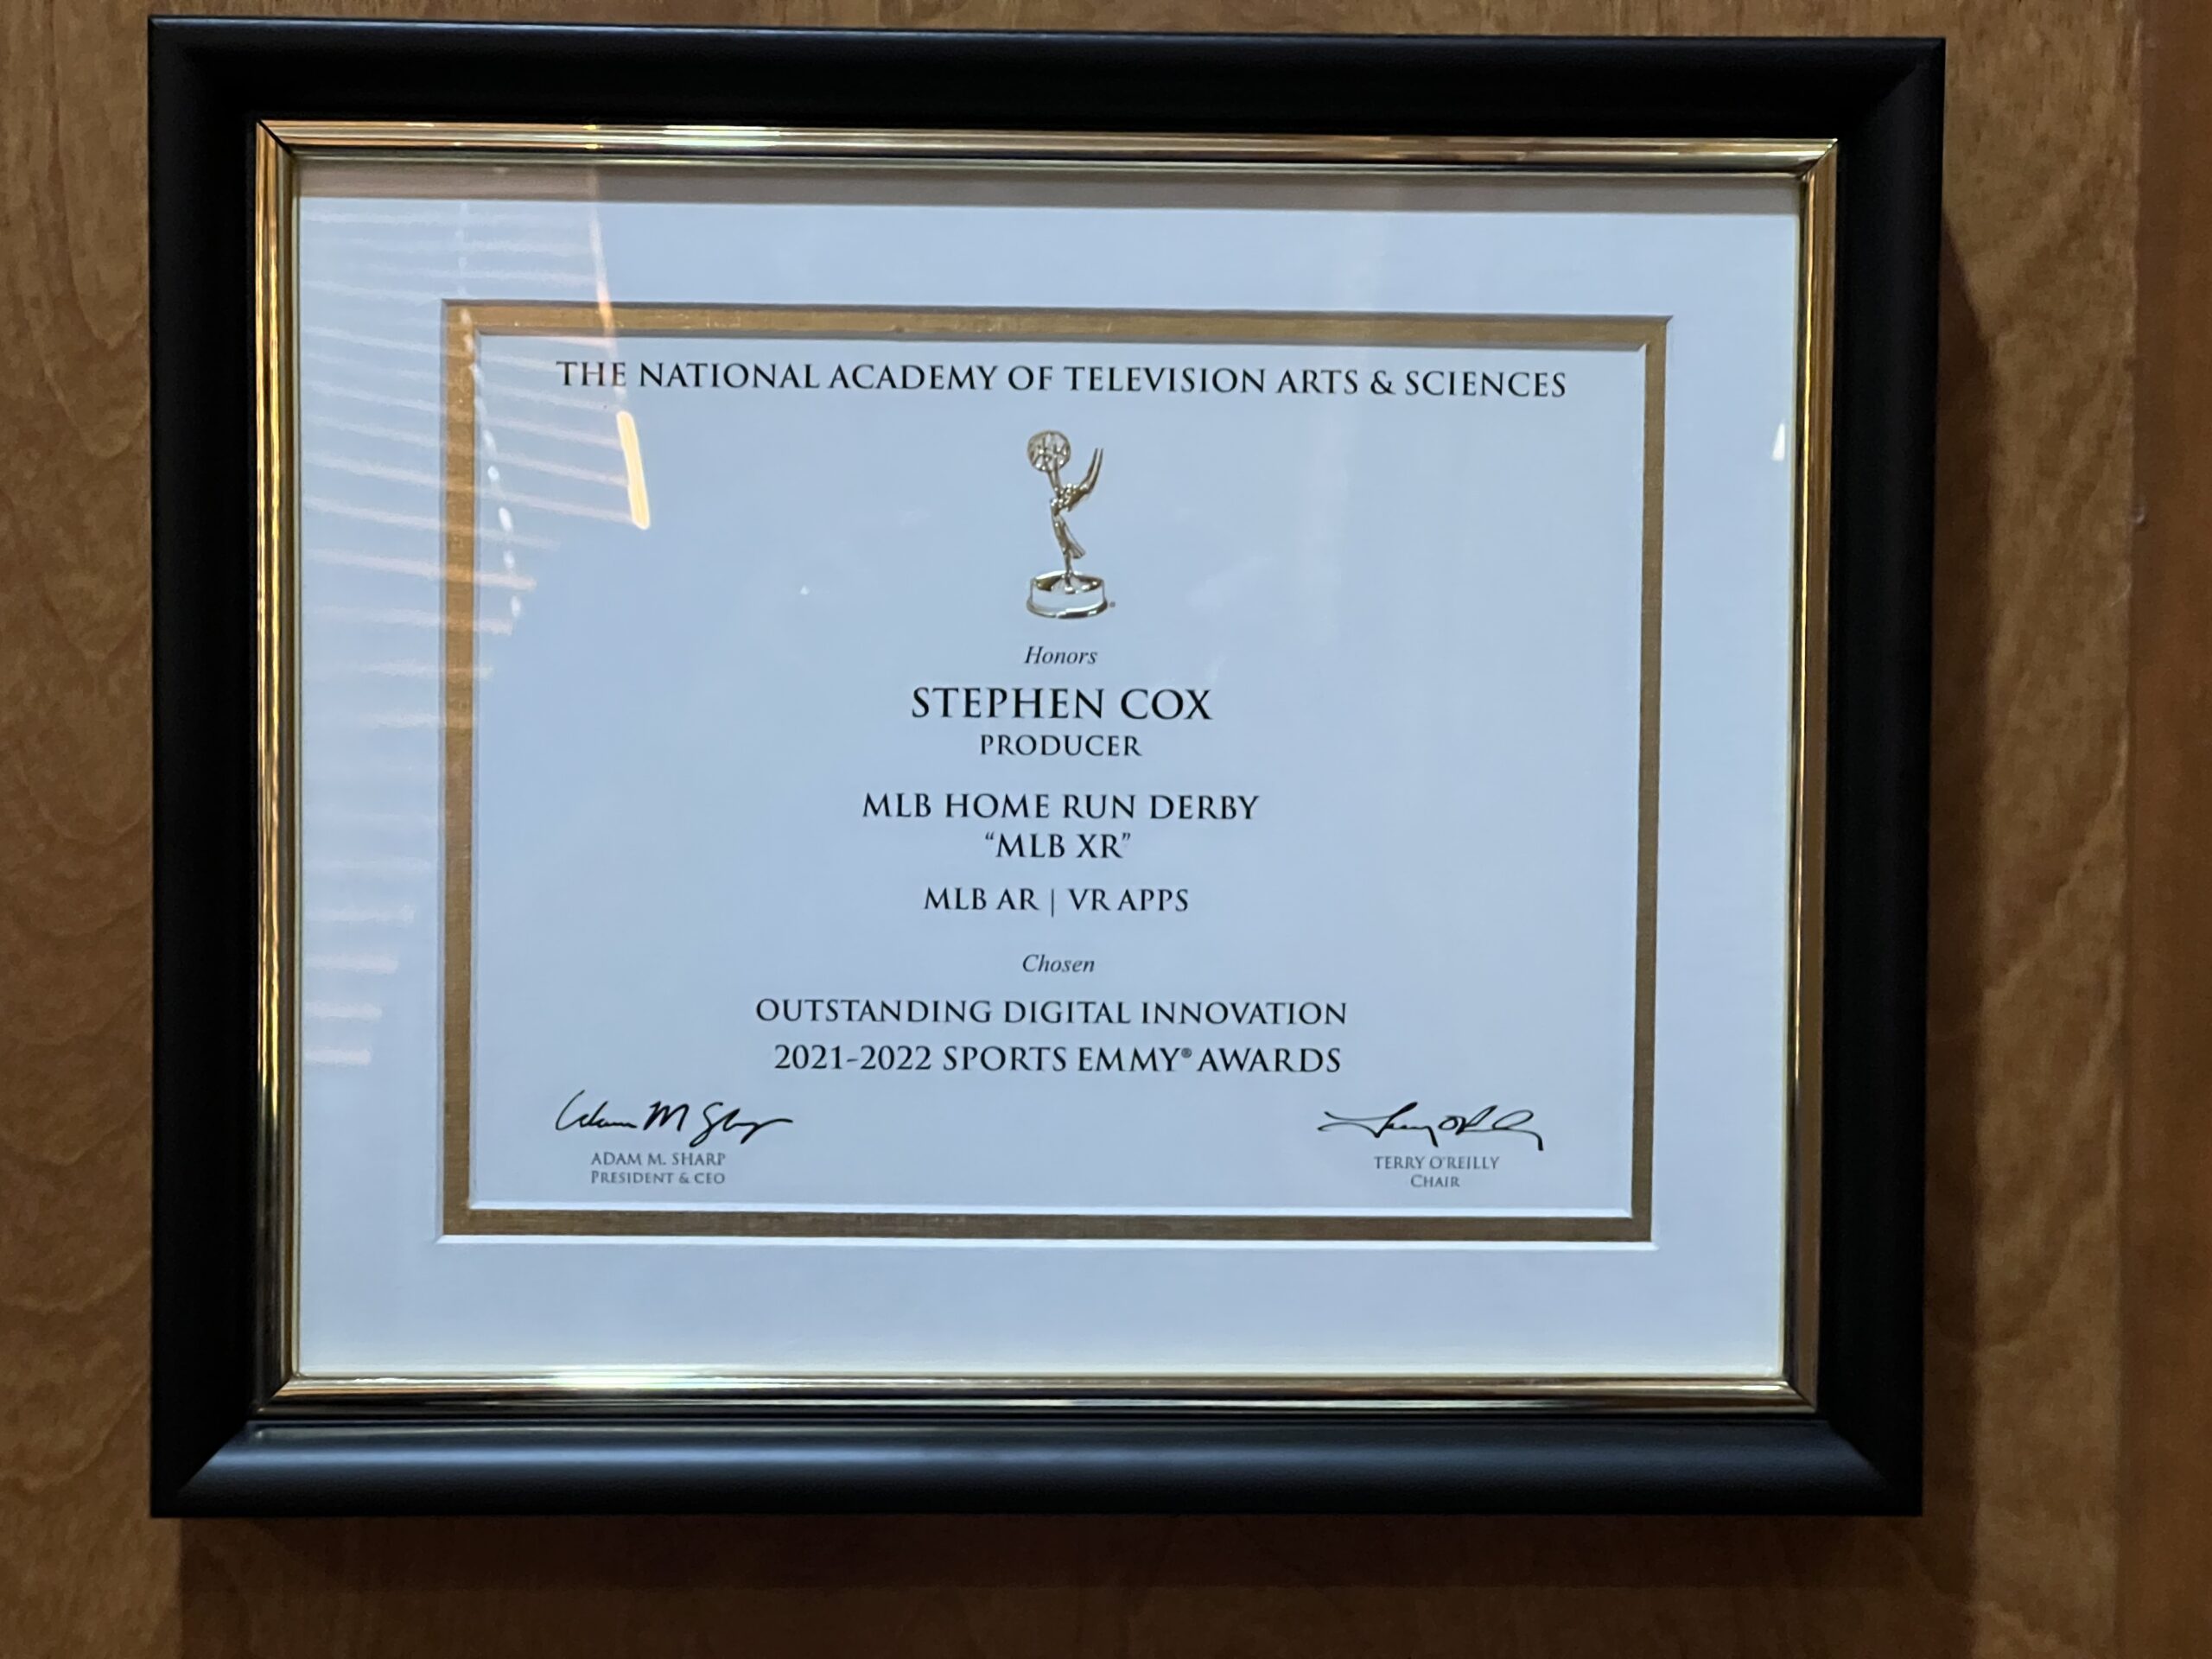 Sag Harbor resident Steve Cox won a Sports Emmy for Outstanding Digital Innovation for the work he did with MLB XR (Extended Reality) as part of the league's Home Run Derby broadcast.